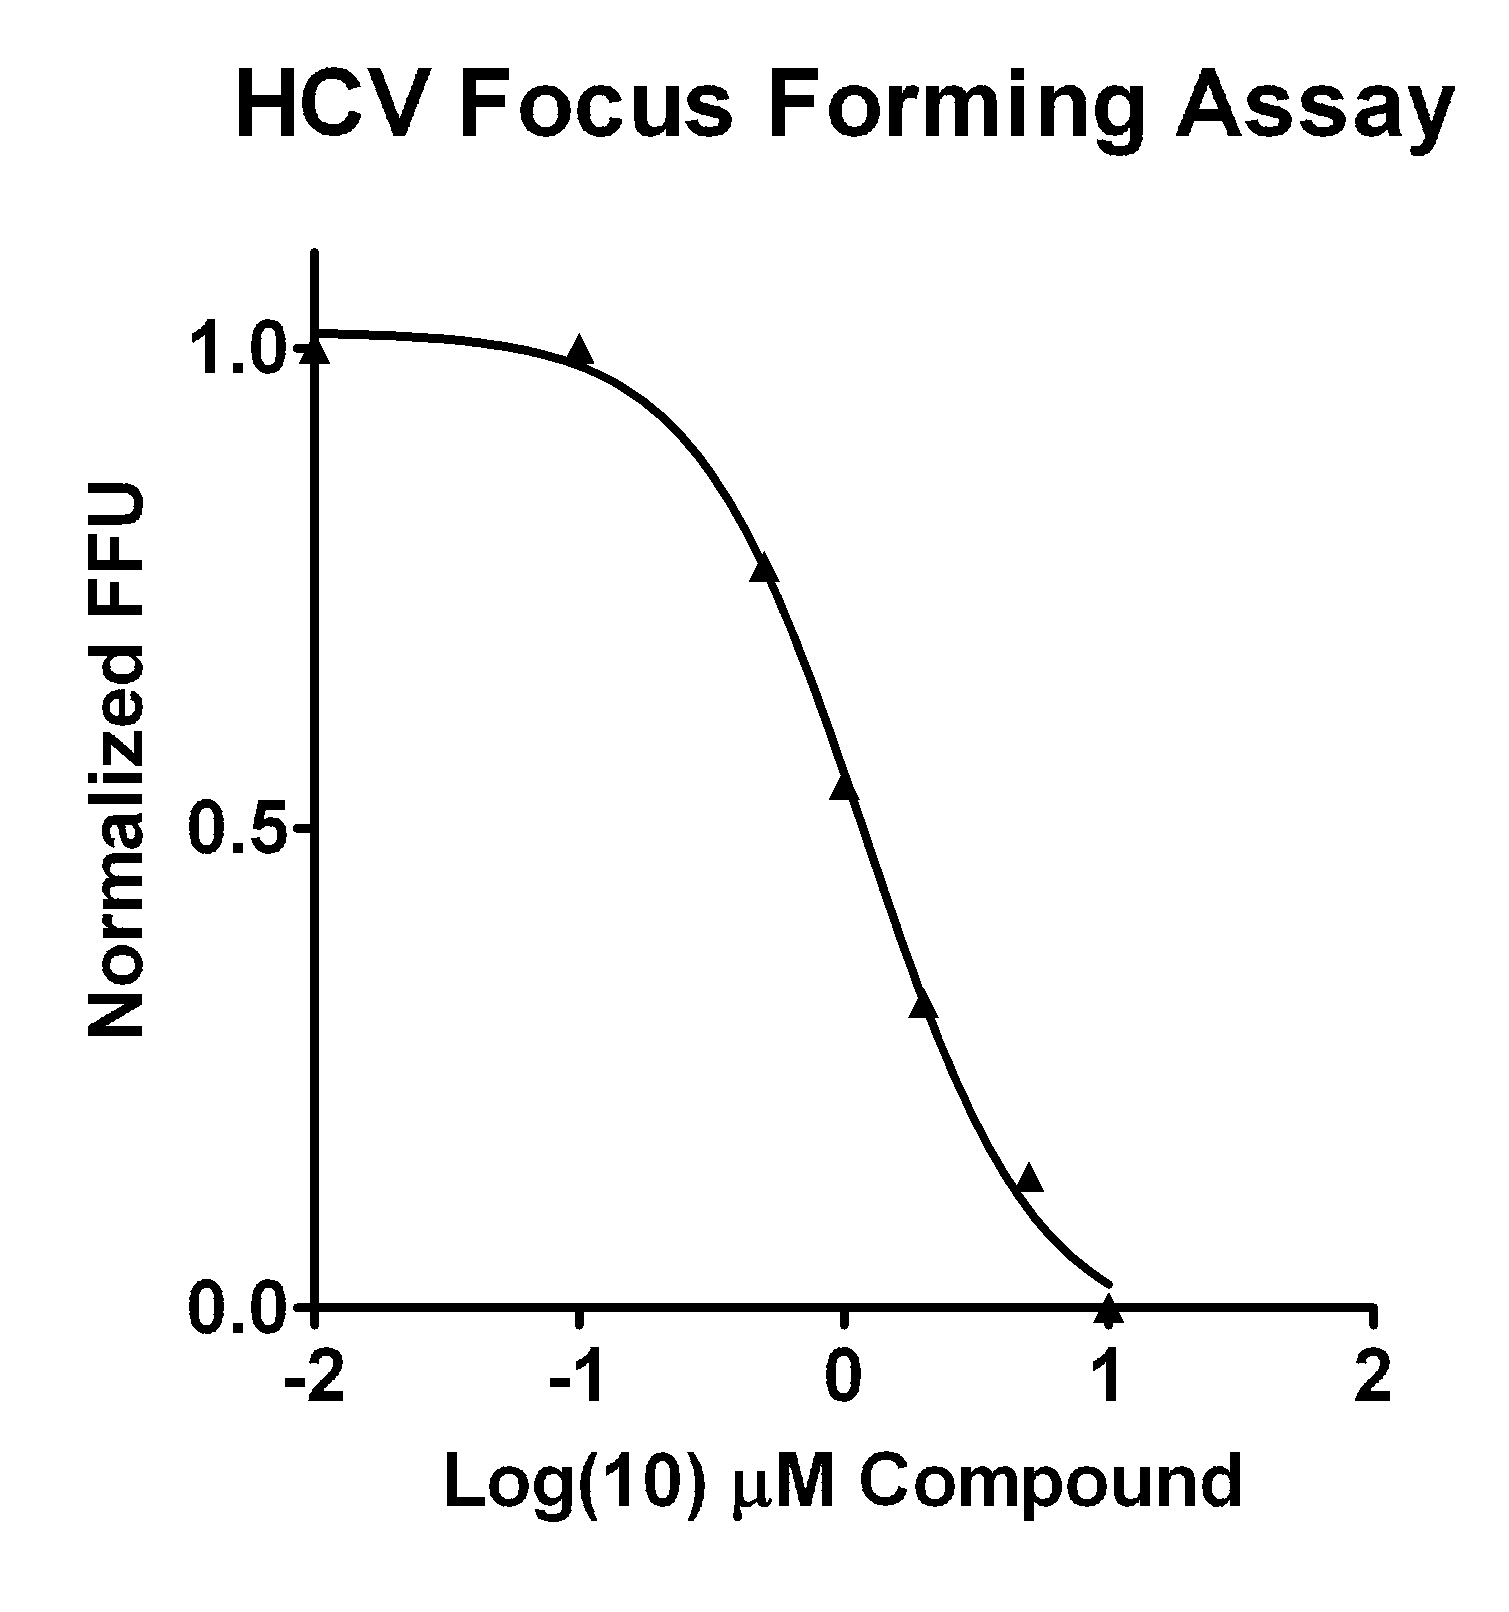 Isoflavone anti-viral compounds